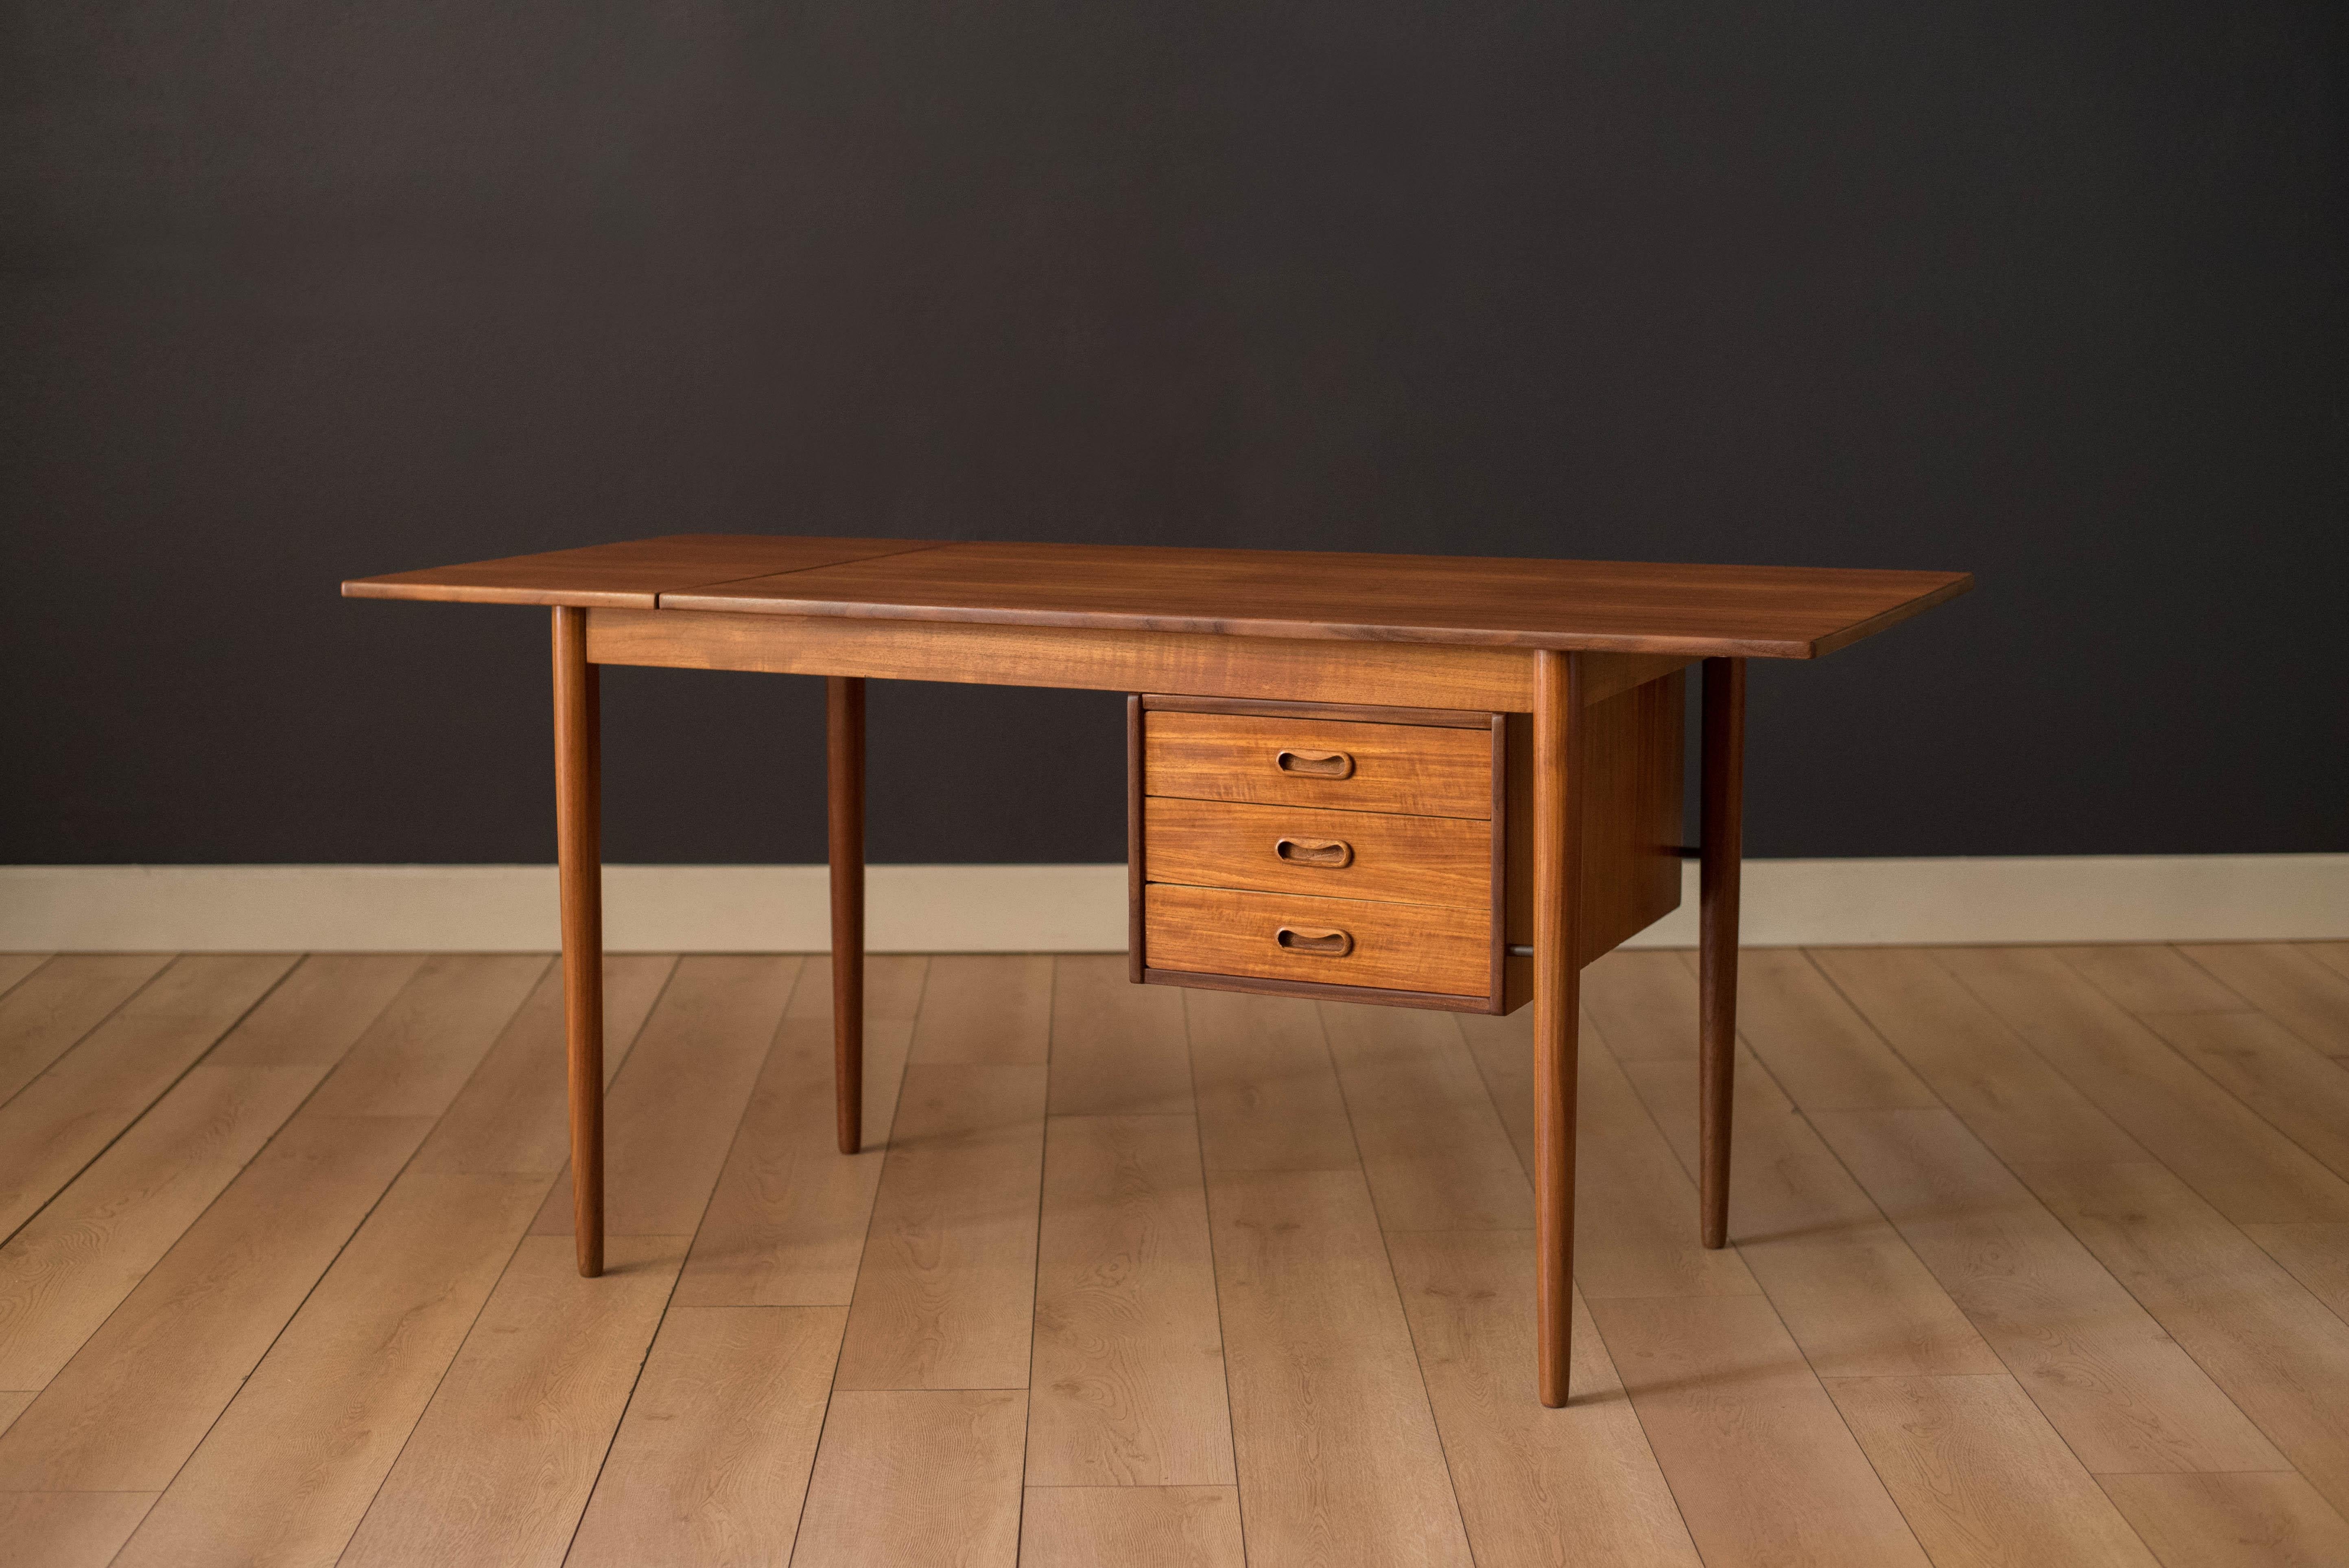 Mid-Century Modern drop leaf desk in teak, circa 1960s. This versatile piece includes three dovetailed with sculpted wood handles. Worktop area expands in size by sliding the drop leaf extension. Accented with brass hardware that attaches to the